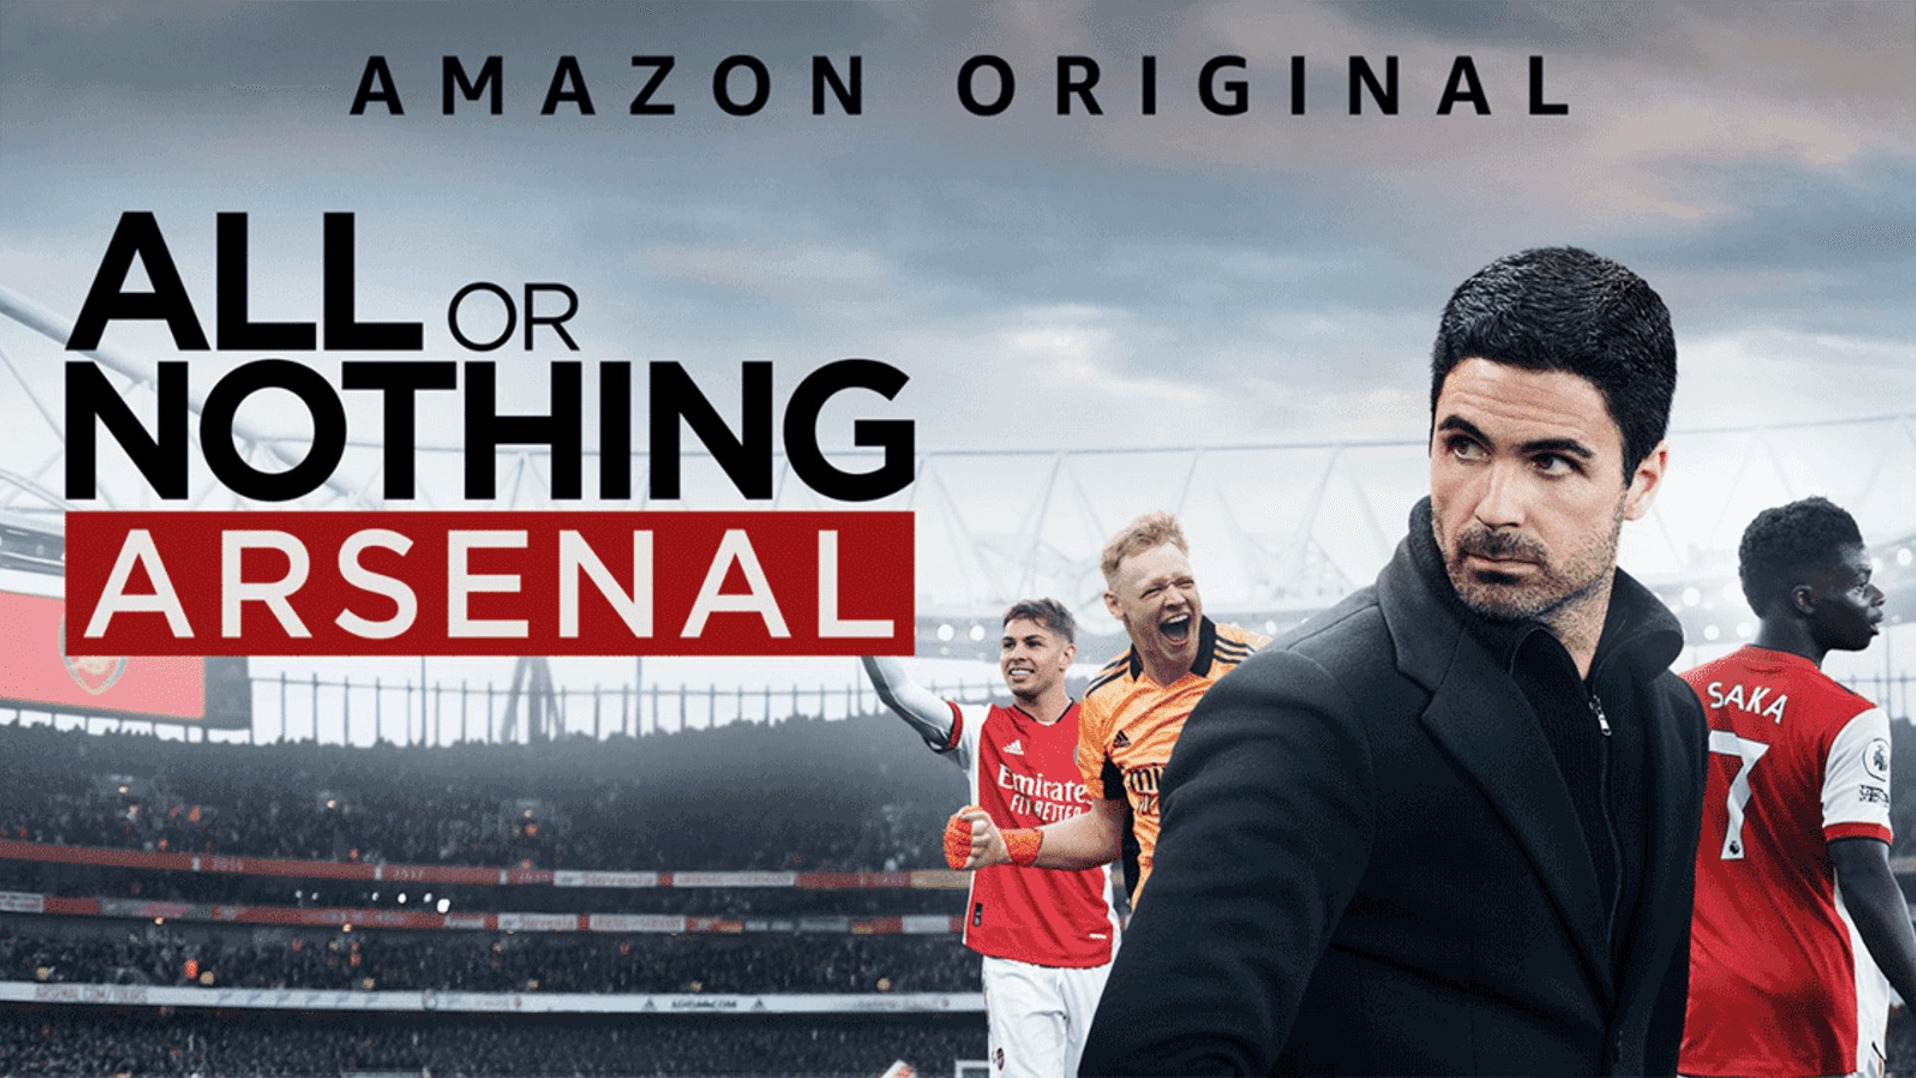 All or nothing: Arsenal 7 release date on Amazon Prime Video